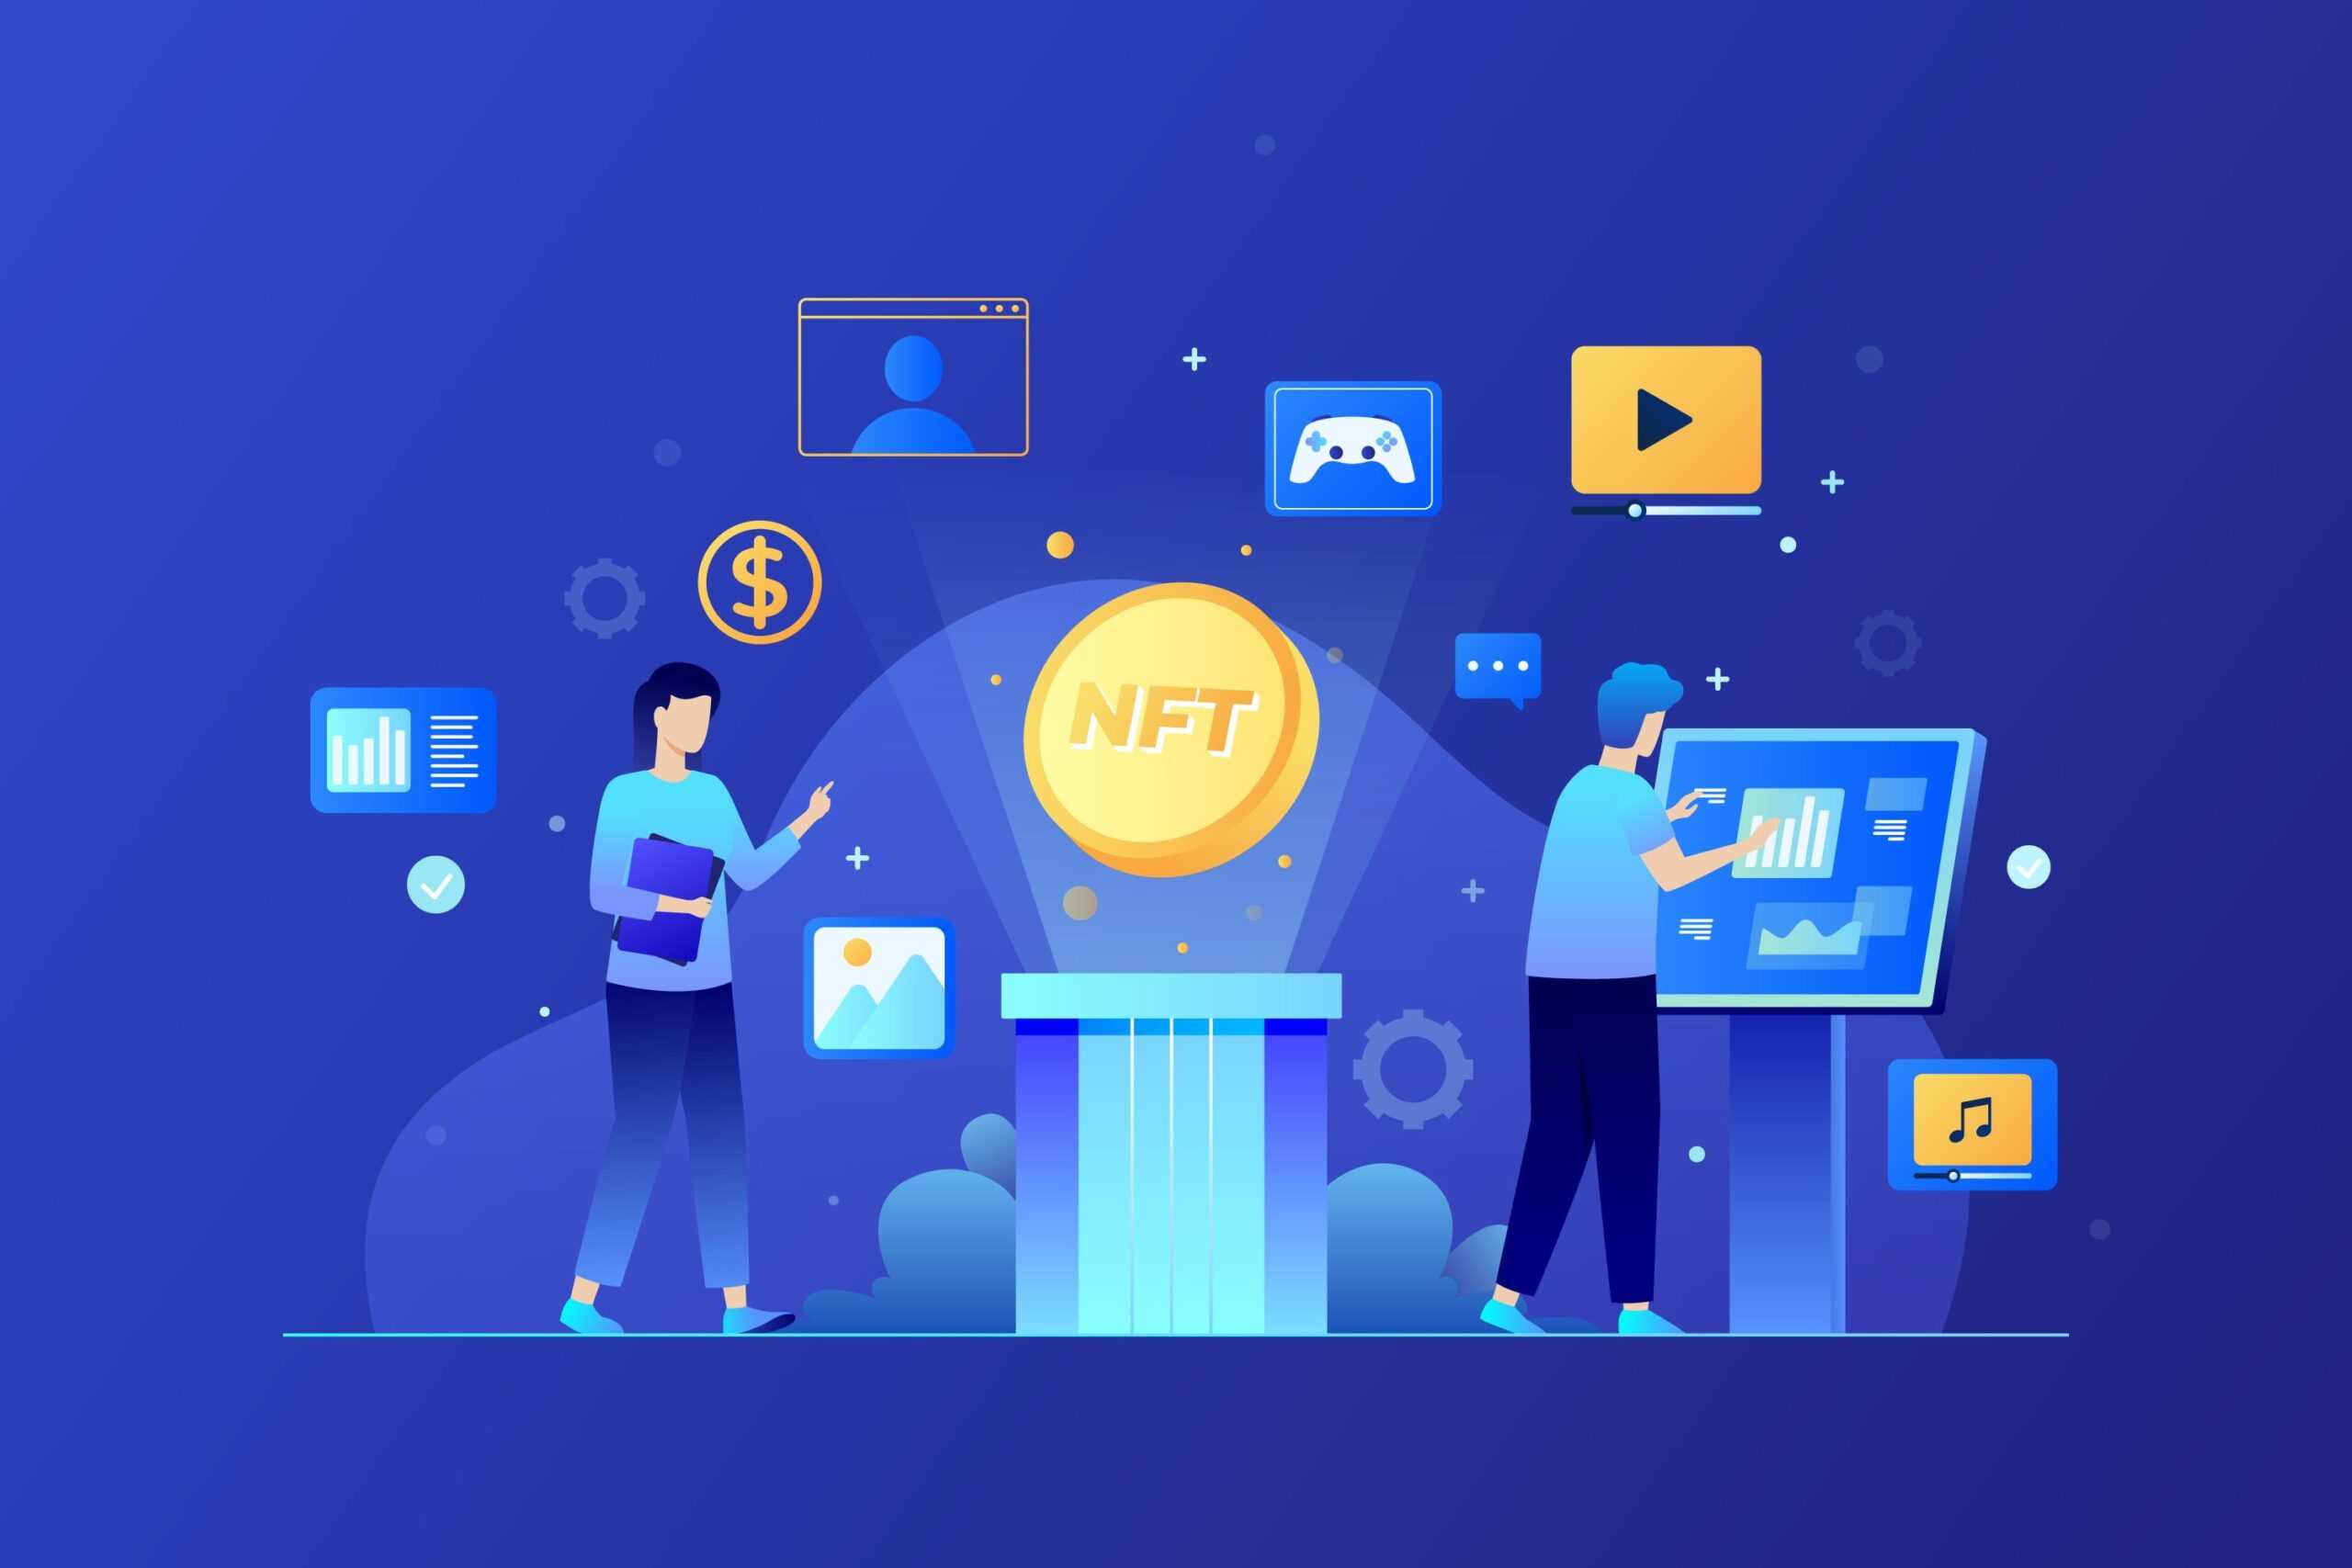 Top 7 NFT Projects to invest in 2022